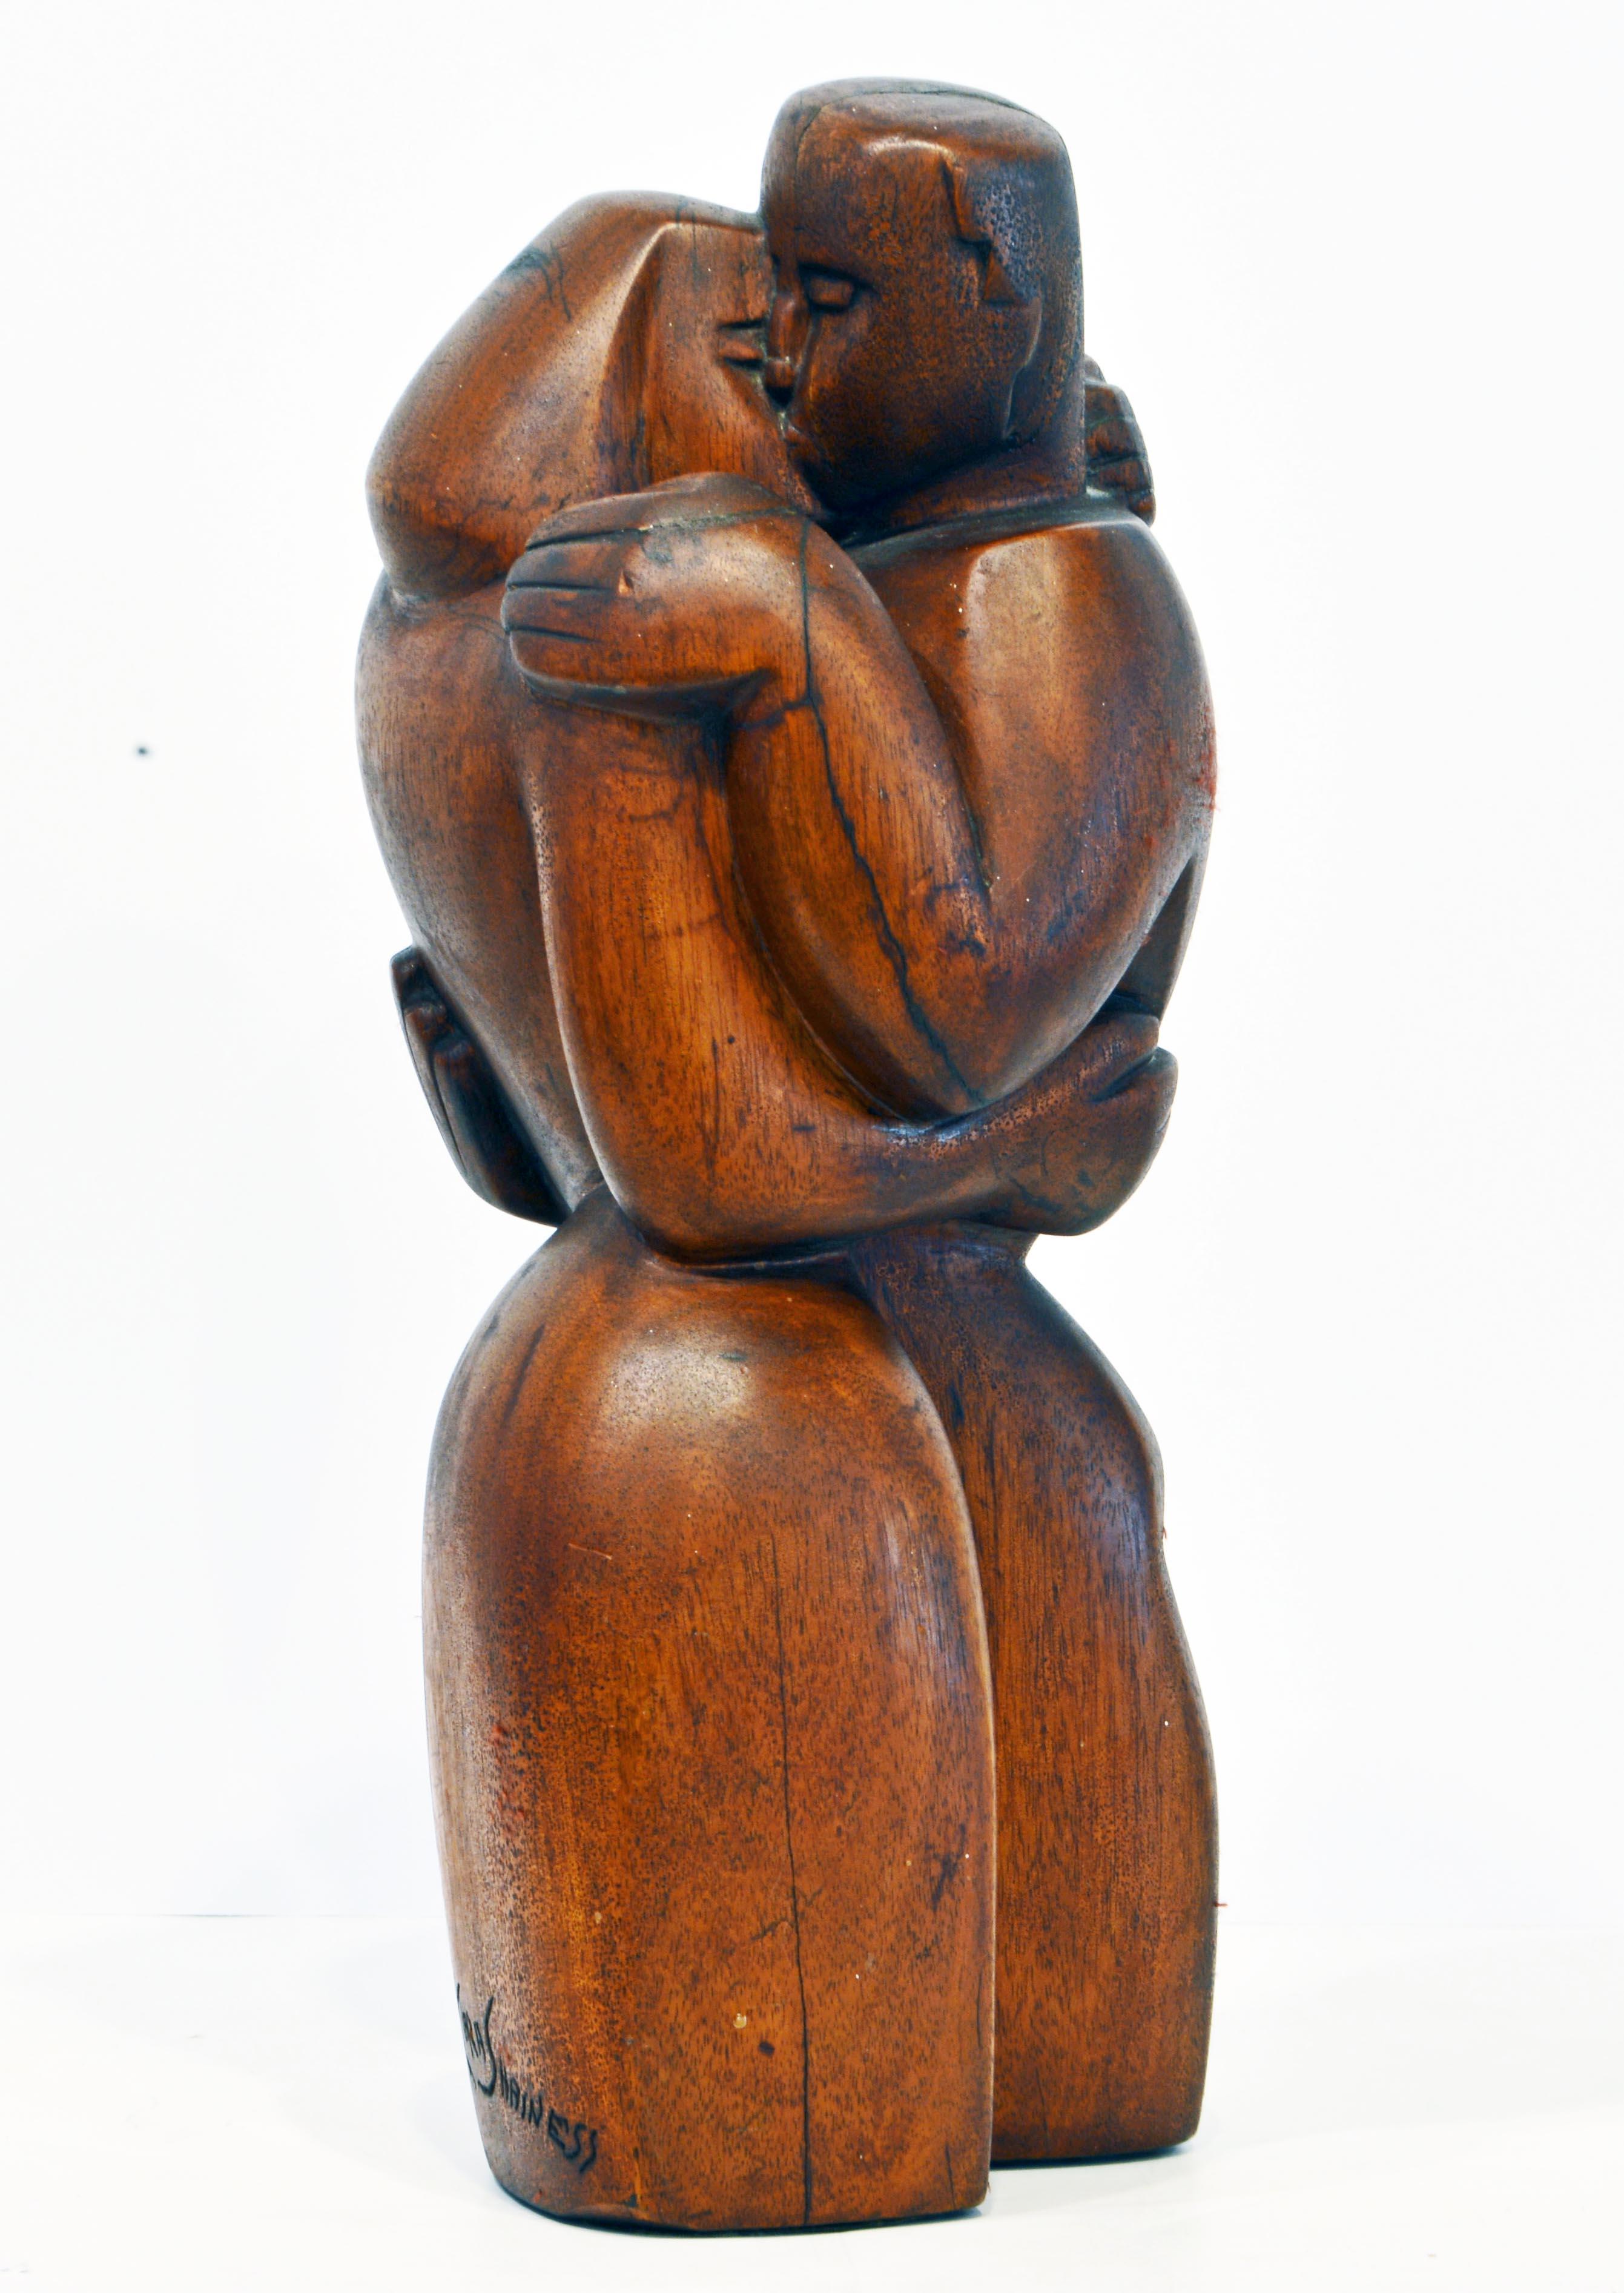 Standing 16 inches tall this fine sculptural work carved in mahogany by New York artist Clara Shainess is titled 'Farewell' by the artist and the cubist inspired form exudes a distinct feeling of both love and sadness. It likely dates to circa